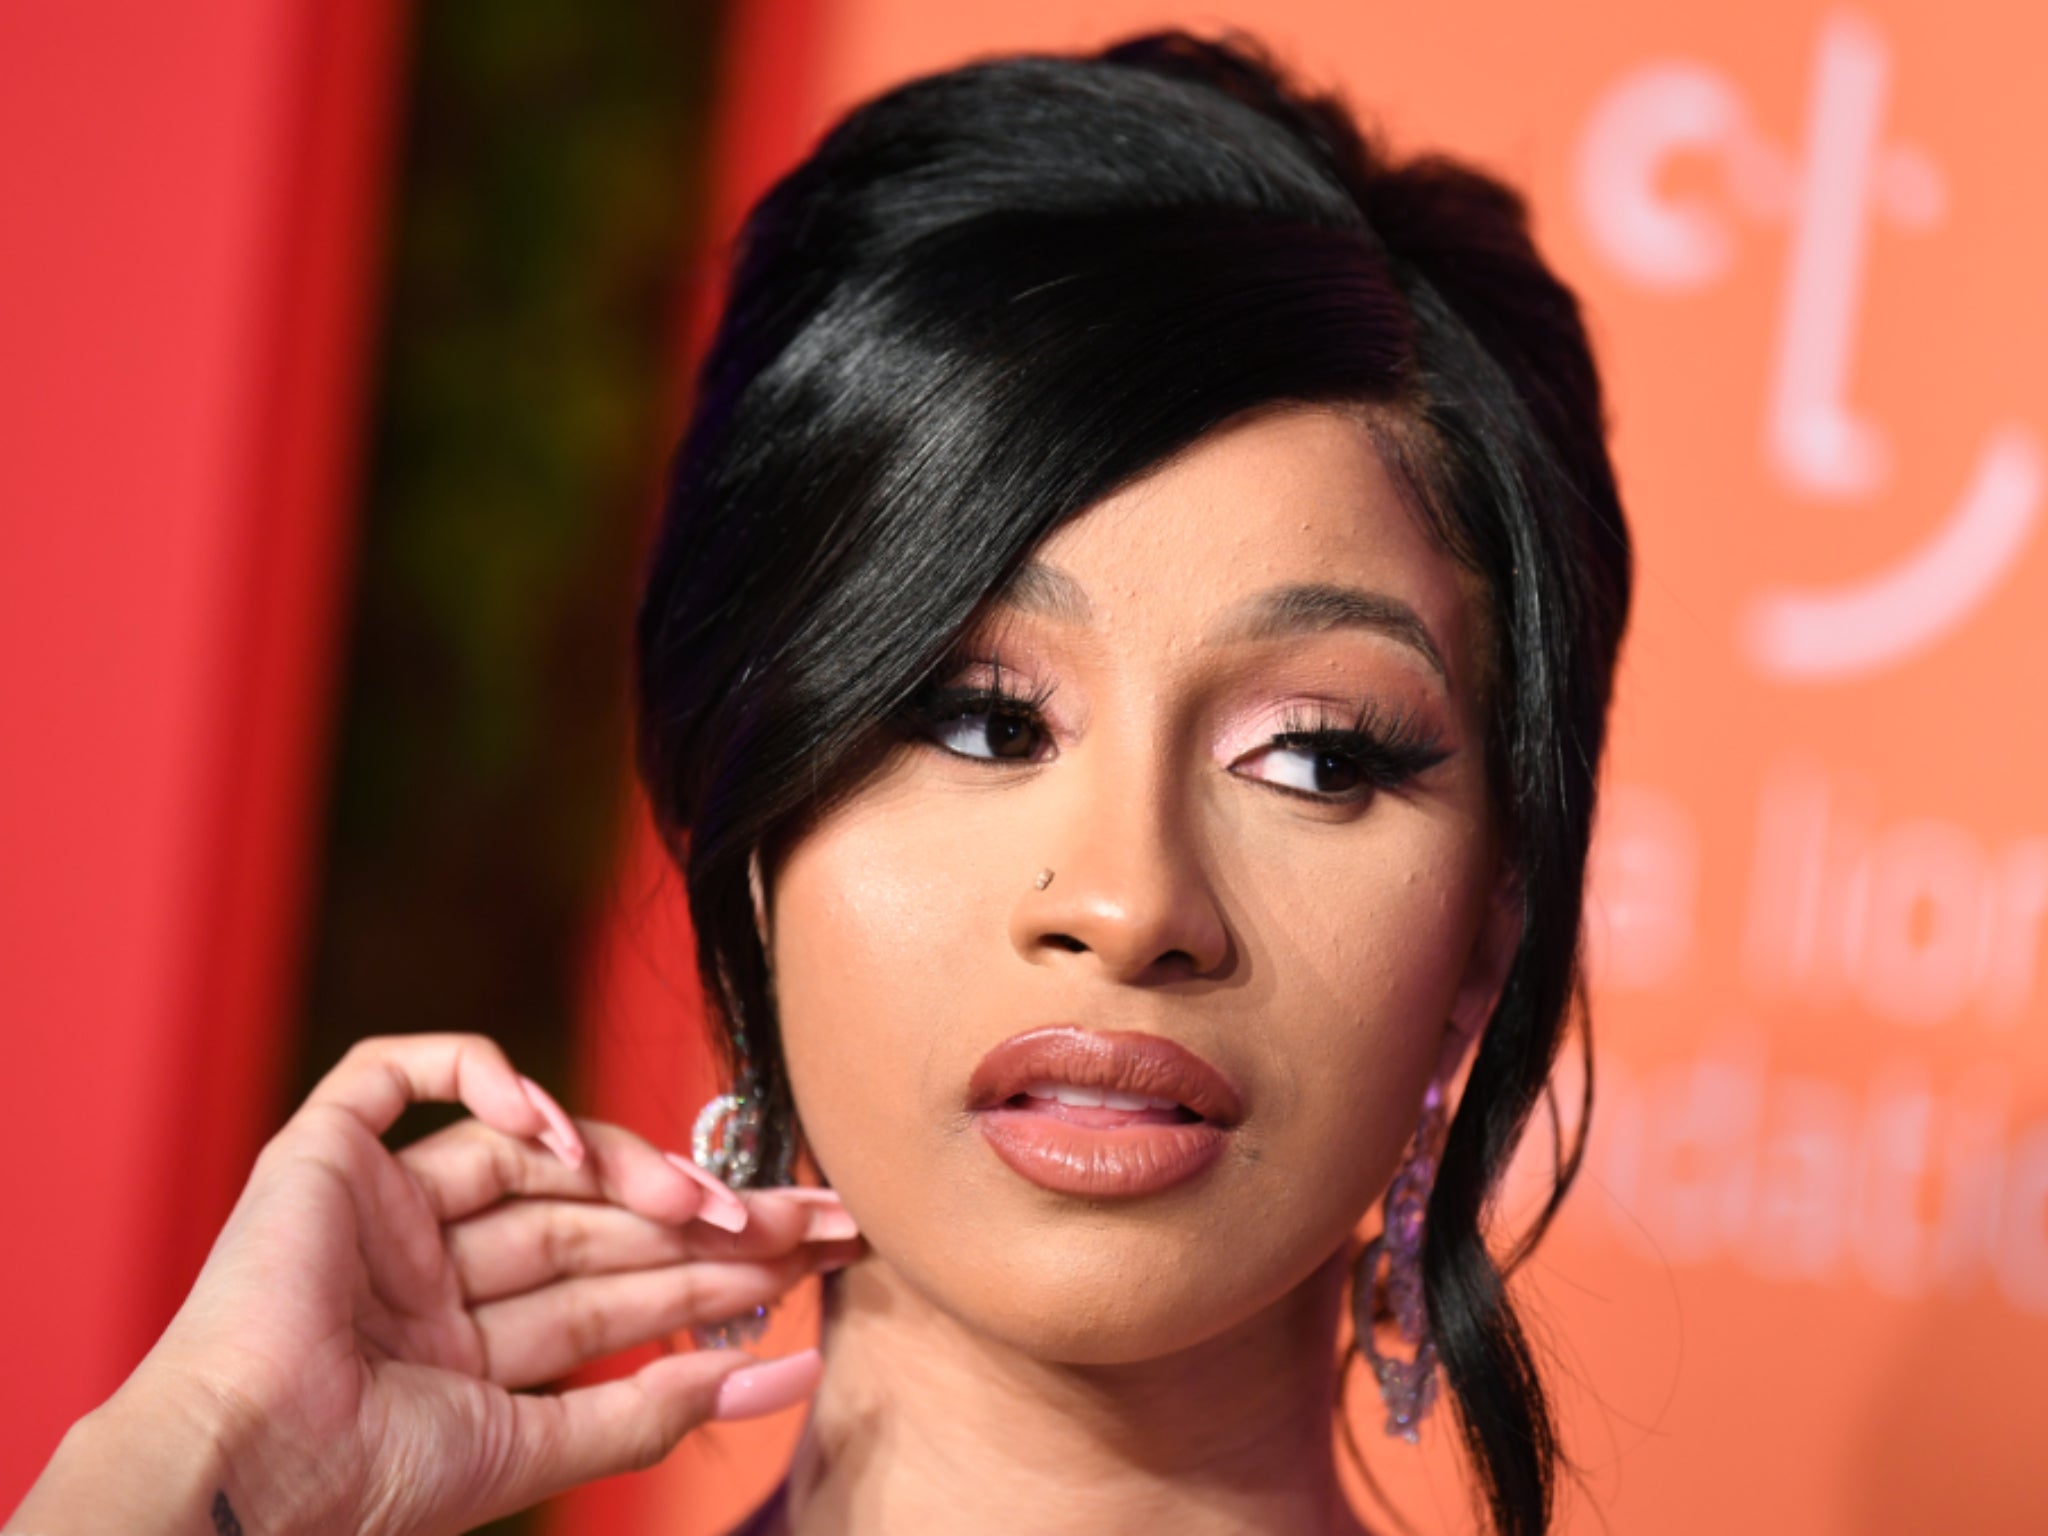 Cardi slammed ‘a whole bunch of 15-year-olds telling me how to live my life'